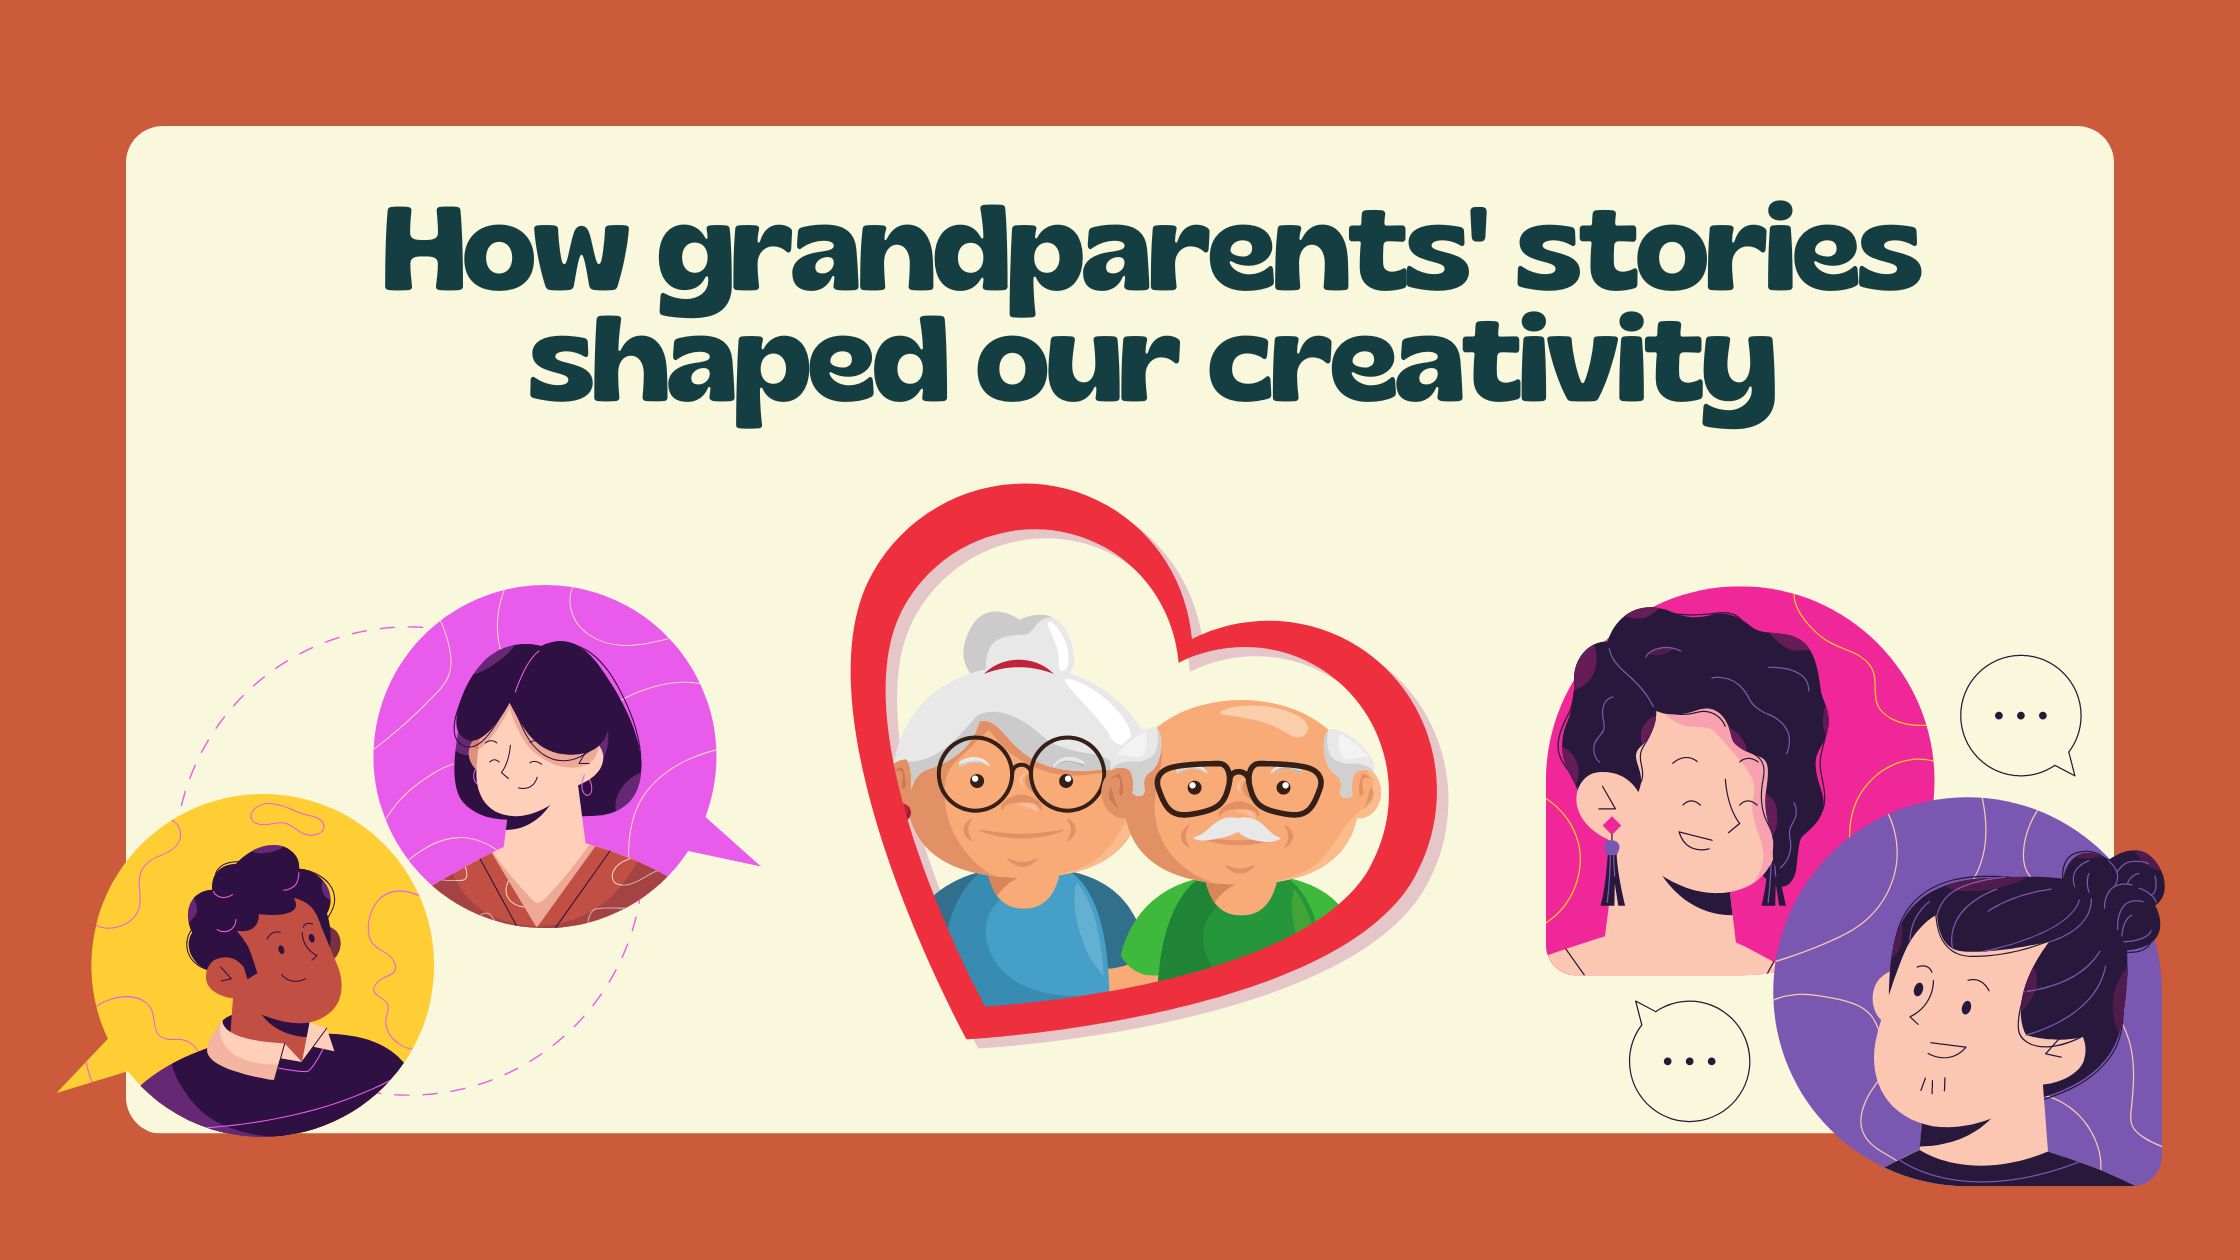 Grandparents and their storytelling secrets